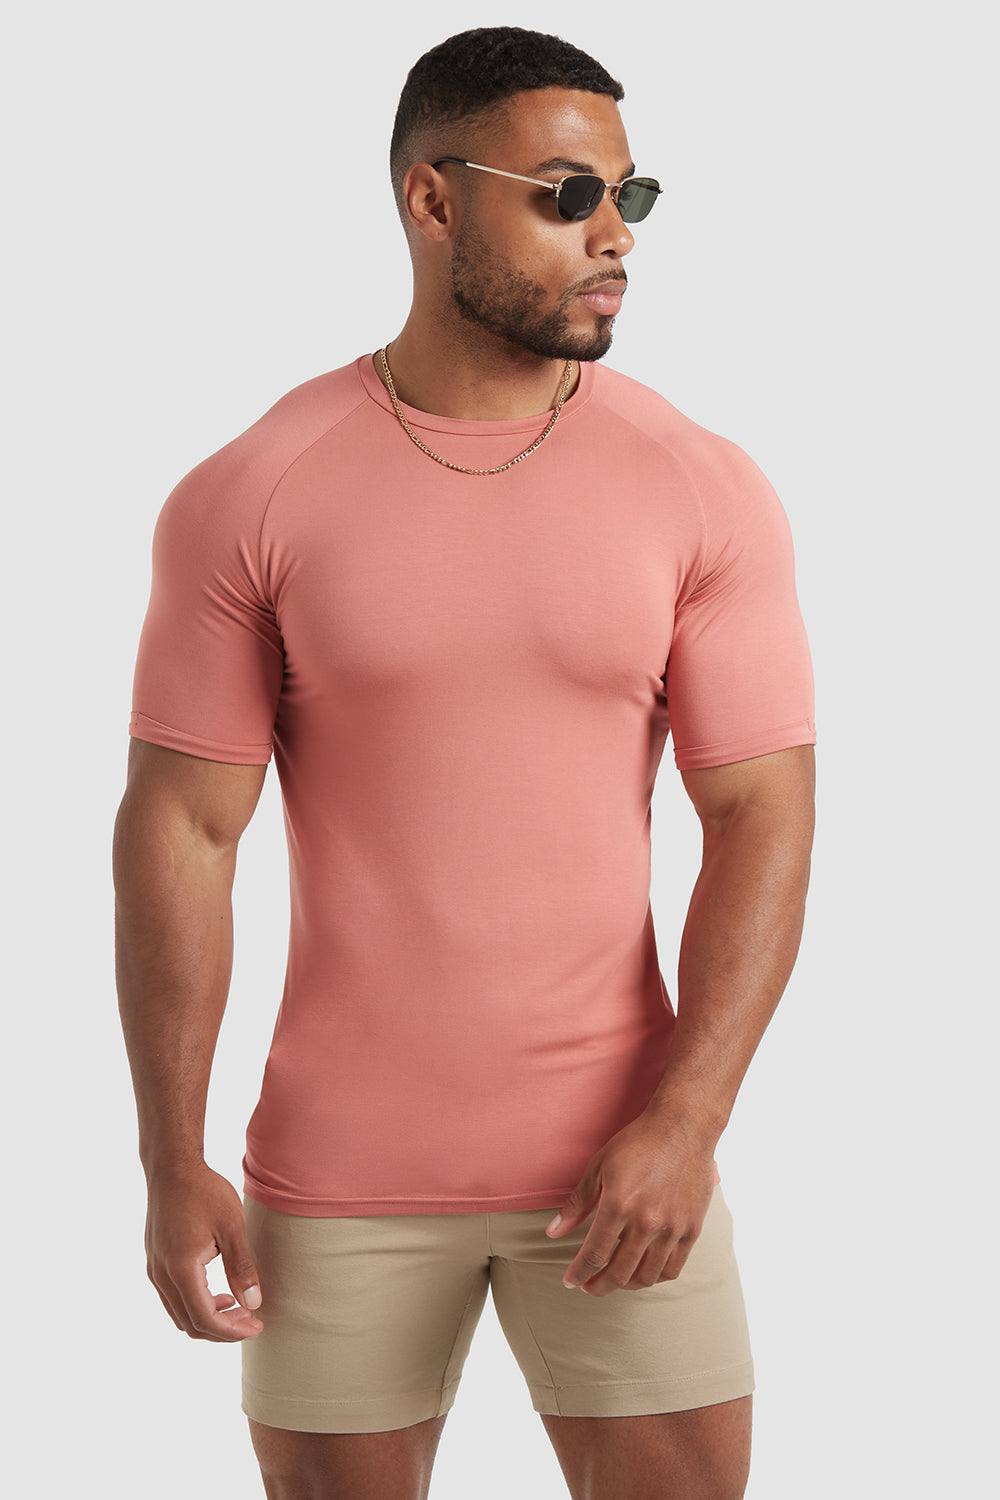 Bamboo Loop Back T-Shirt in Terracotta - TAILORED ATHLETE - ROW